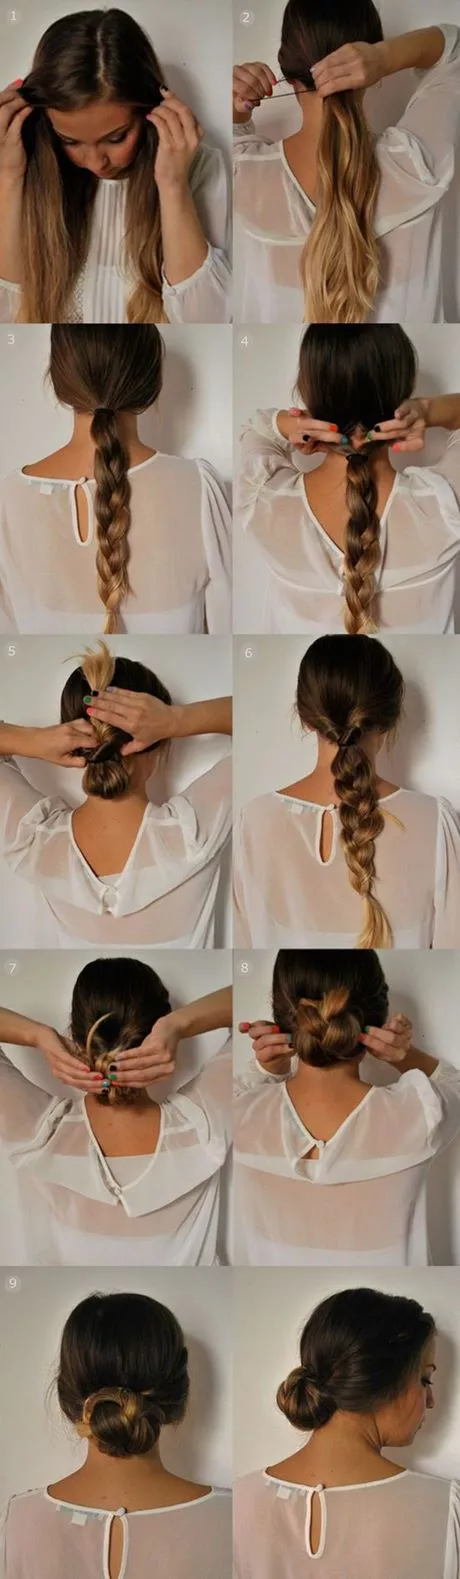 Simple but cute hairstyles simple-but-cute-hairstyles-01_11-3-3